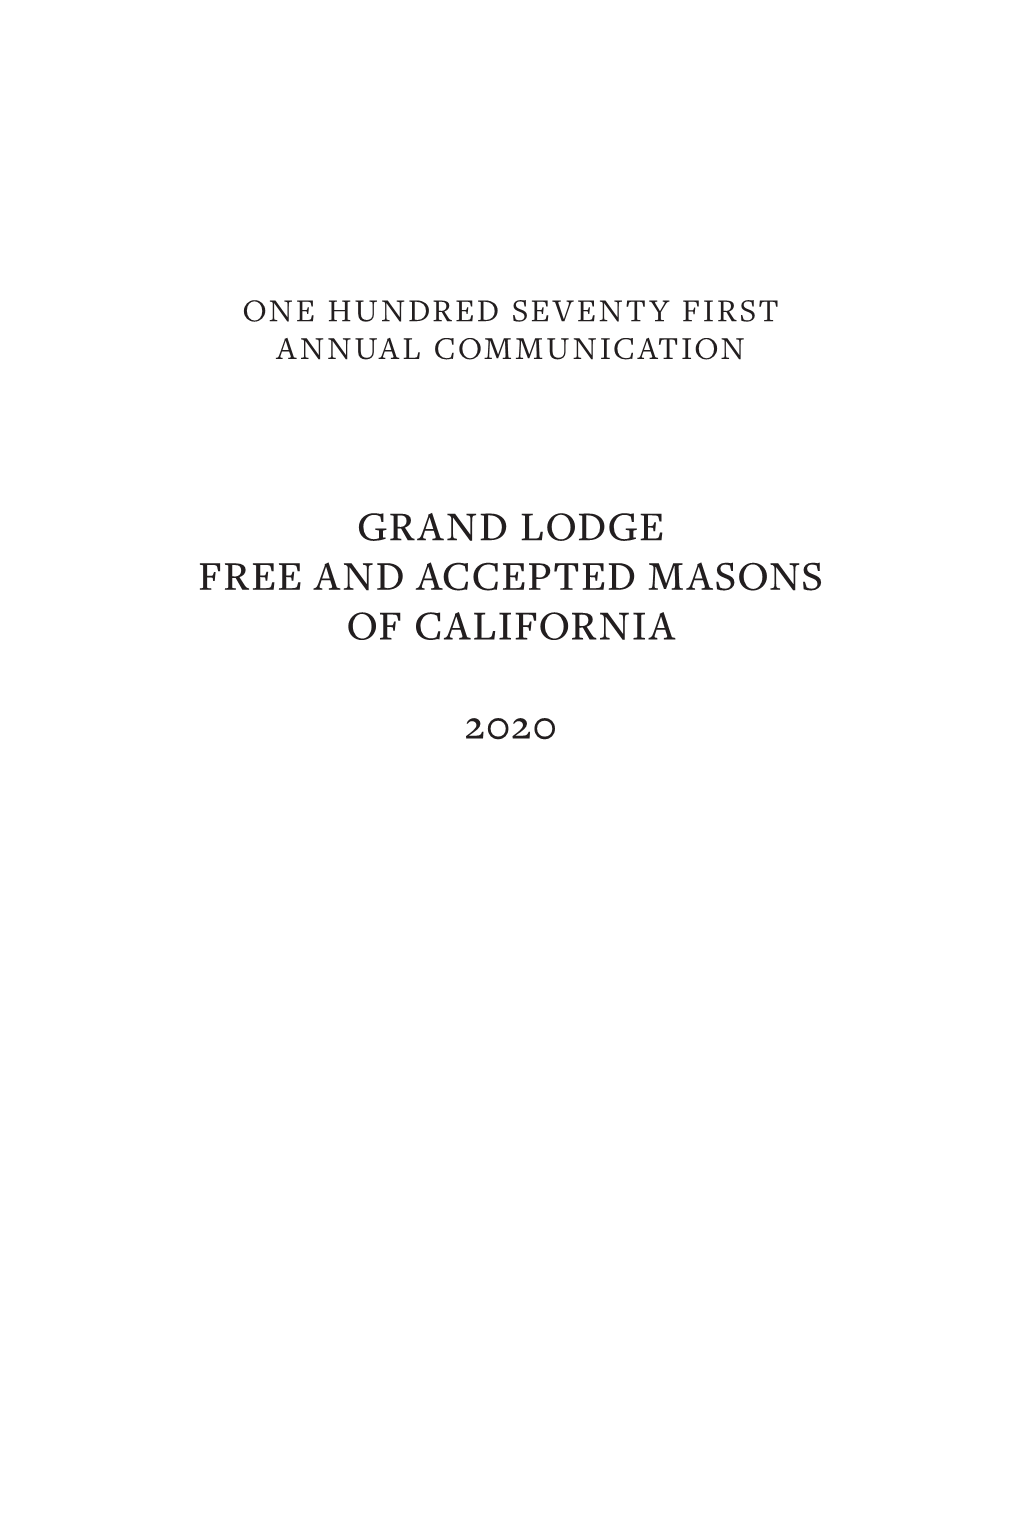 Grand Lodge Free and Accepted Masons of California